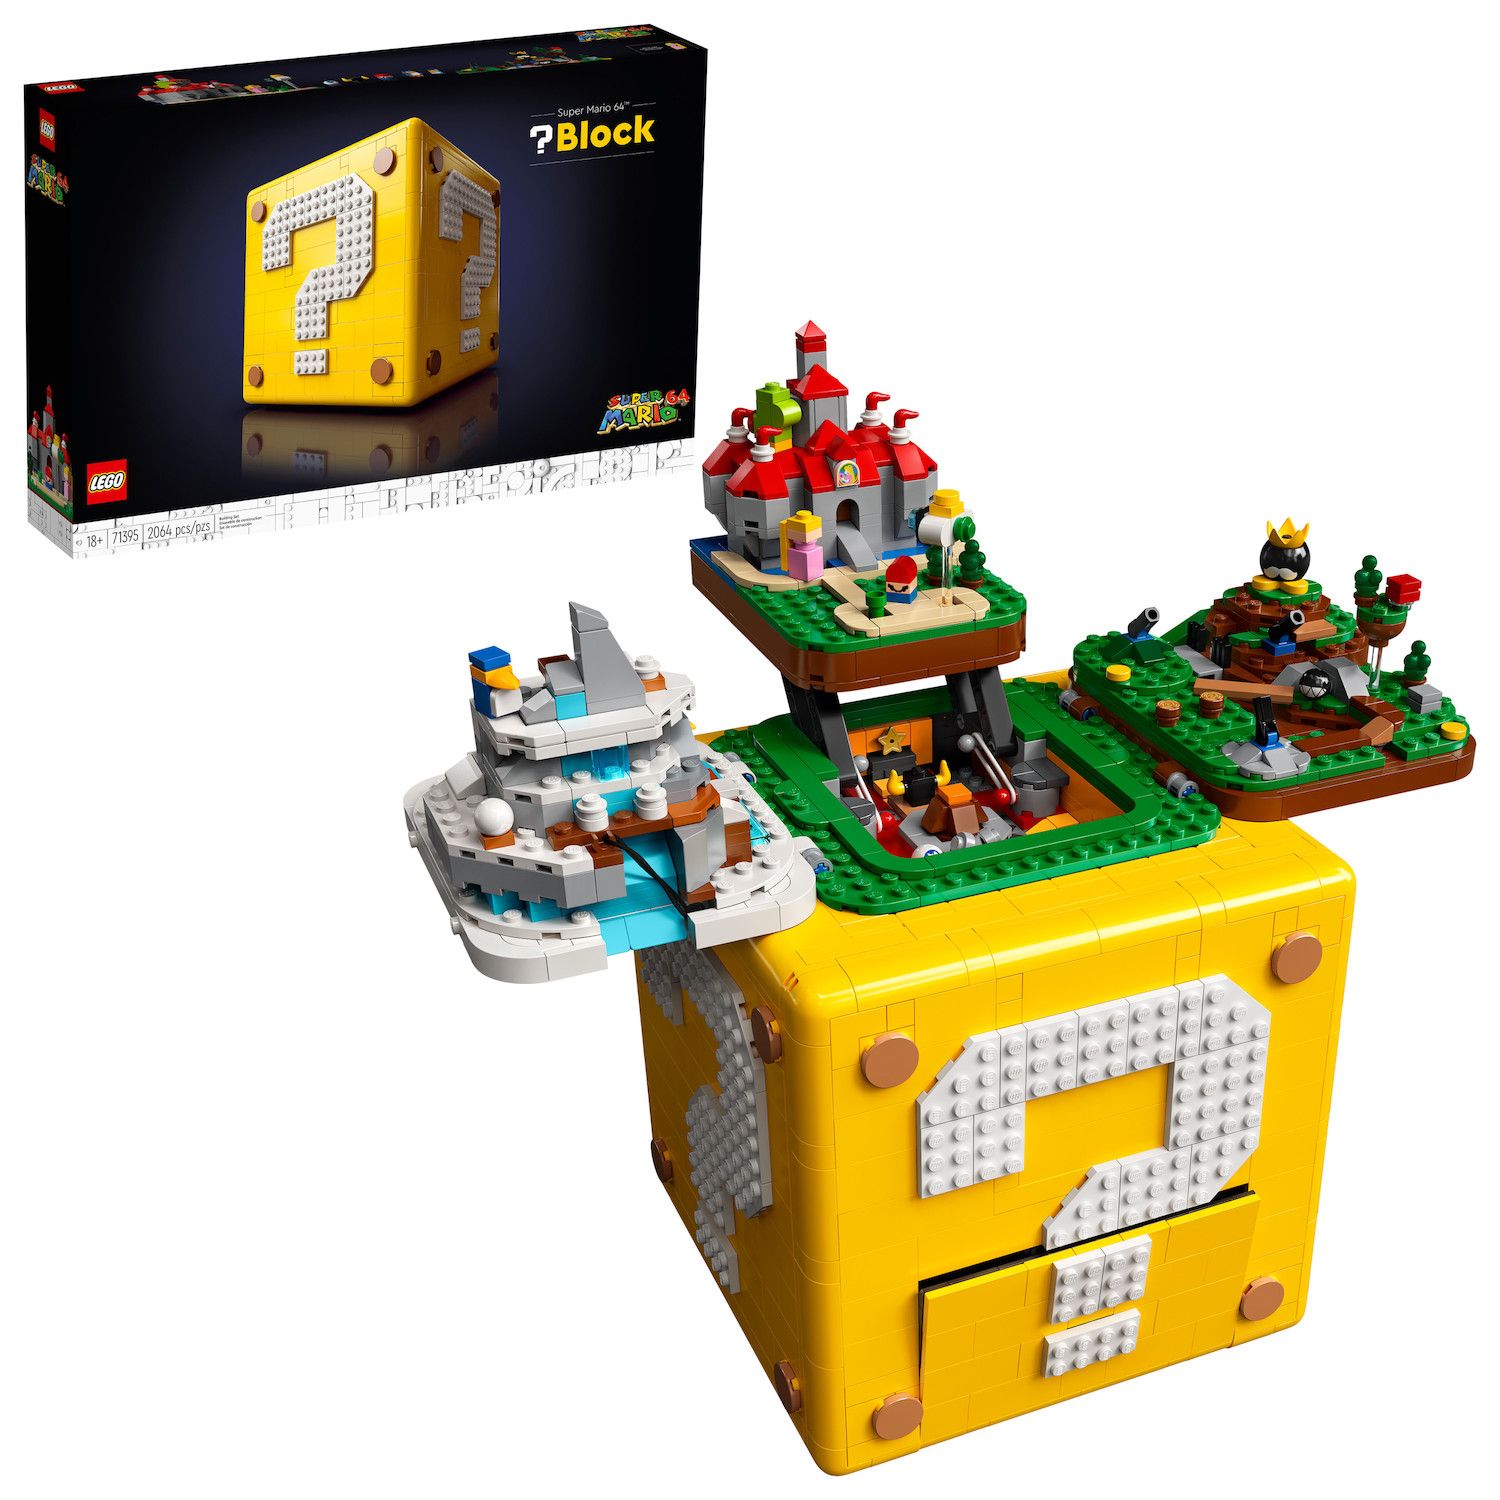 Image for LEGO Super Mario 64 Question Mark Block 71395 Building Kit (2,064 Pieces) at Kohl's.